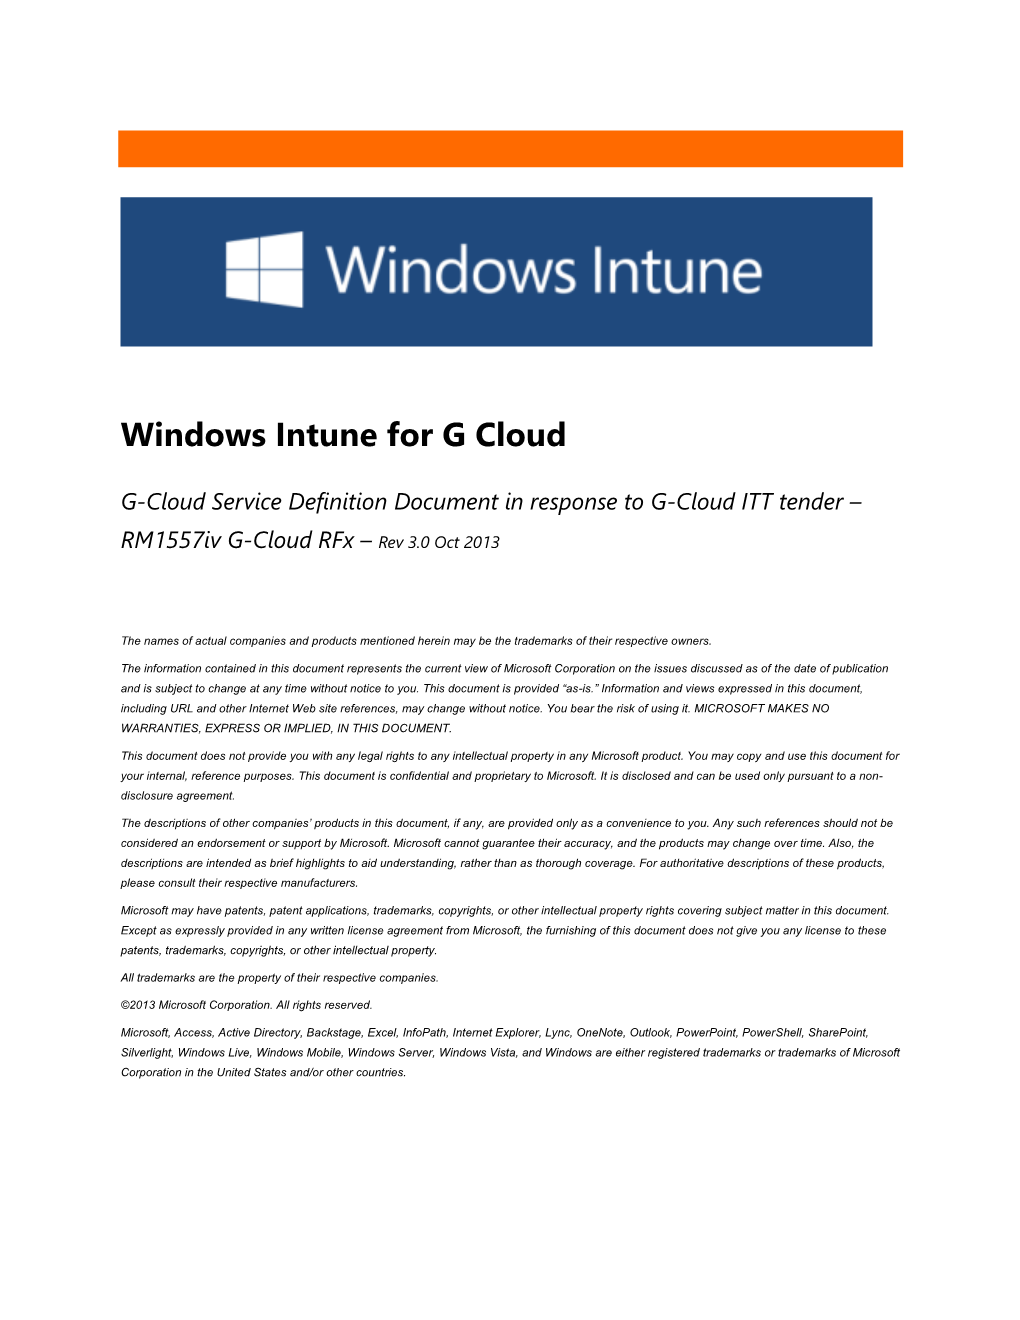 Windows Intune for G Cloud